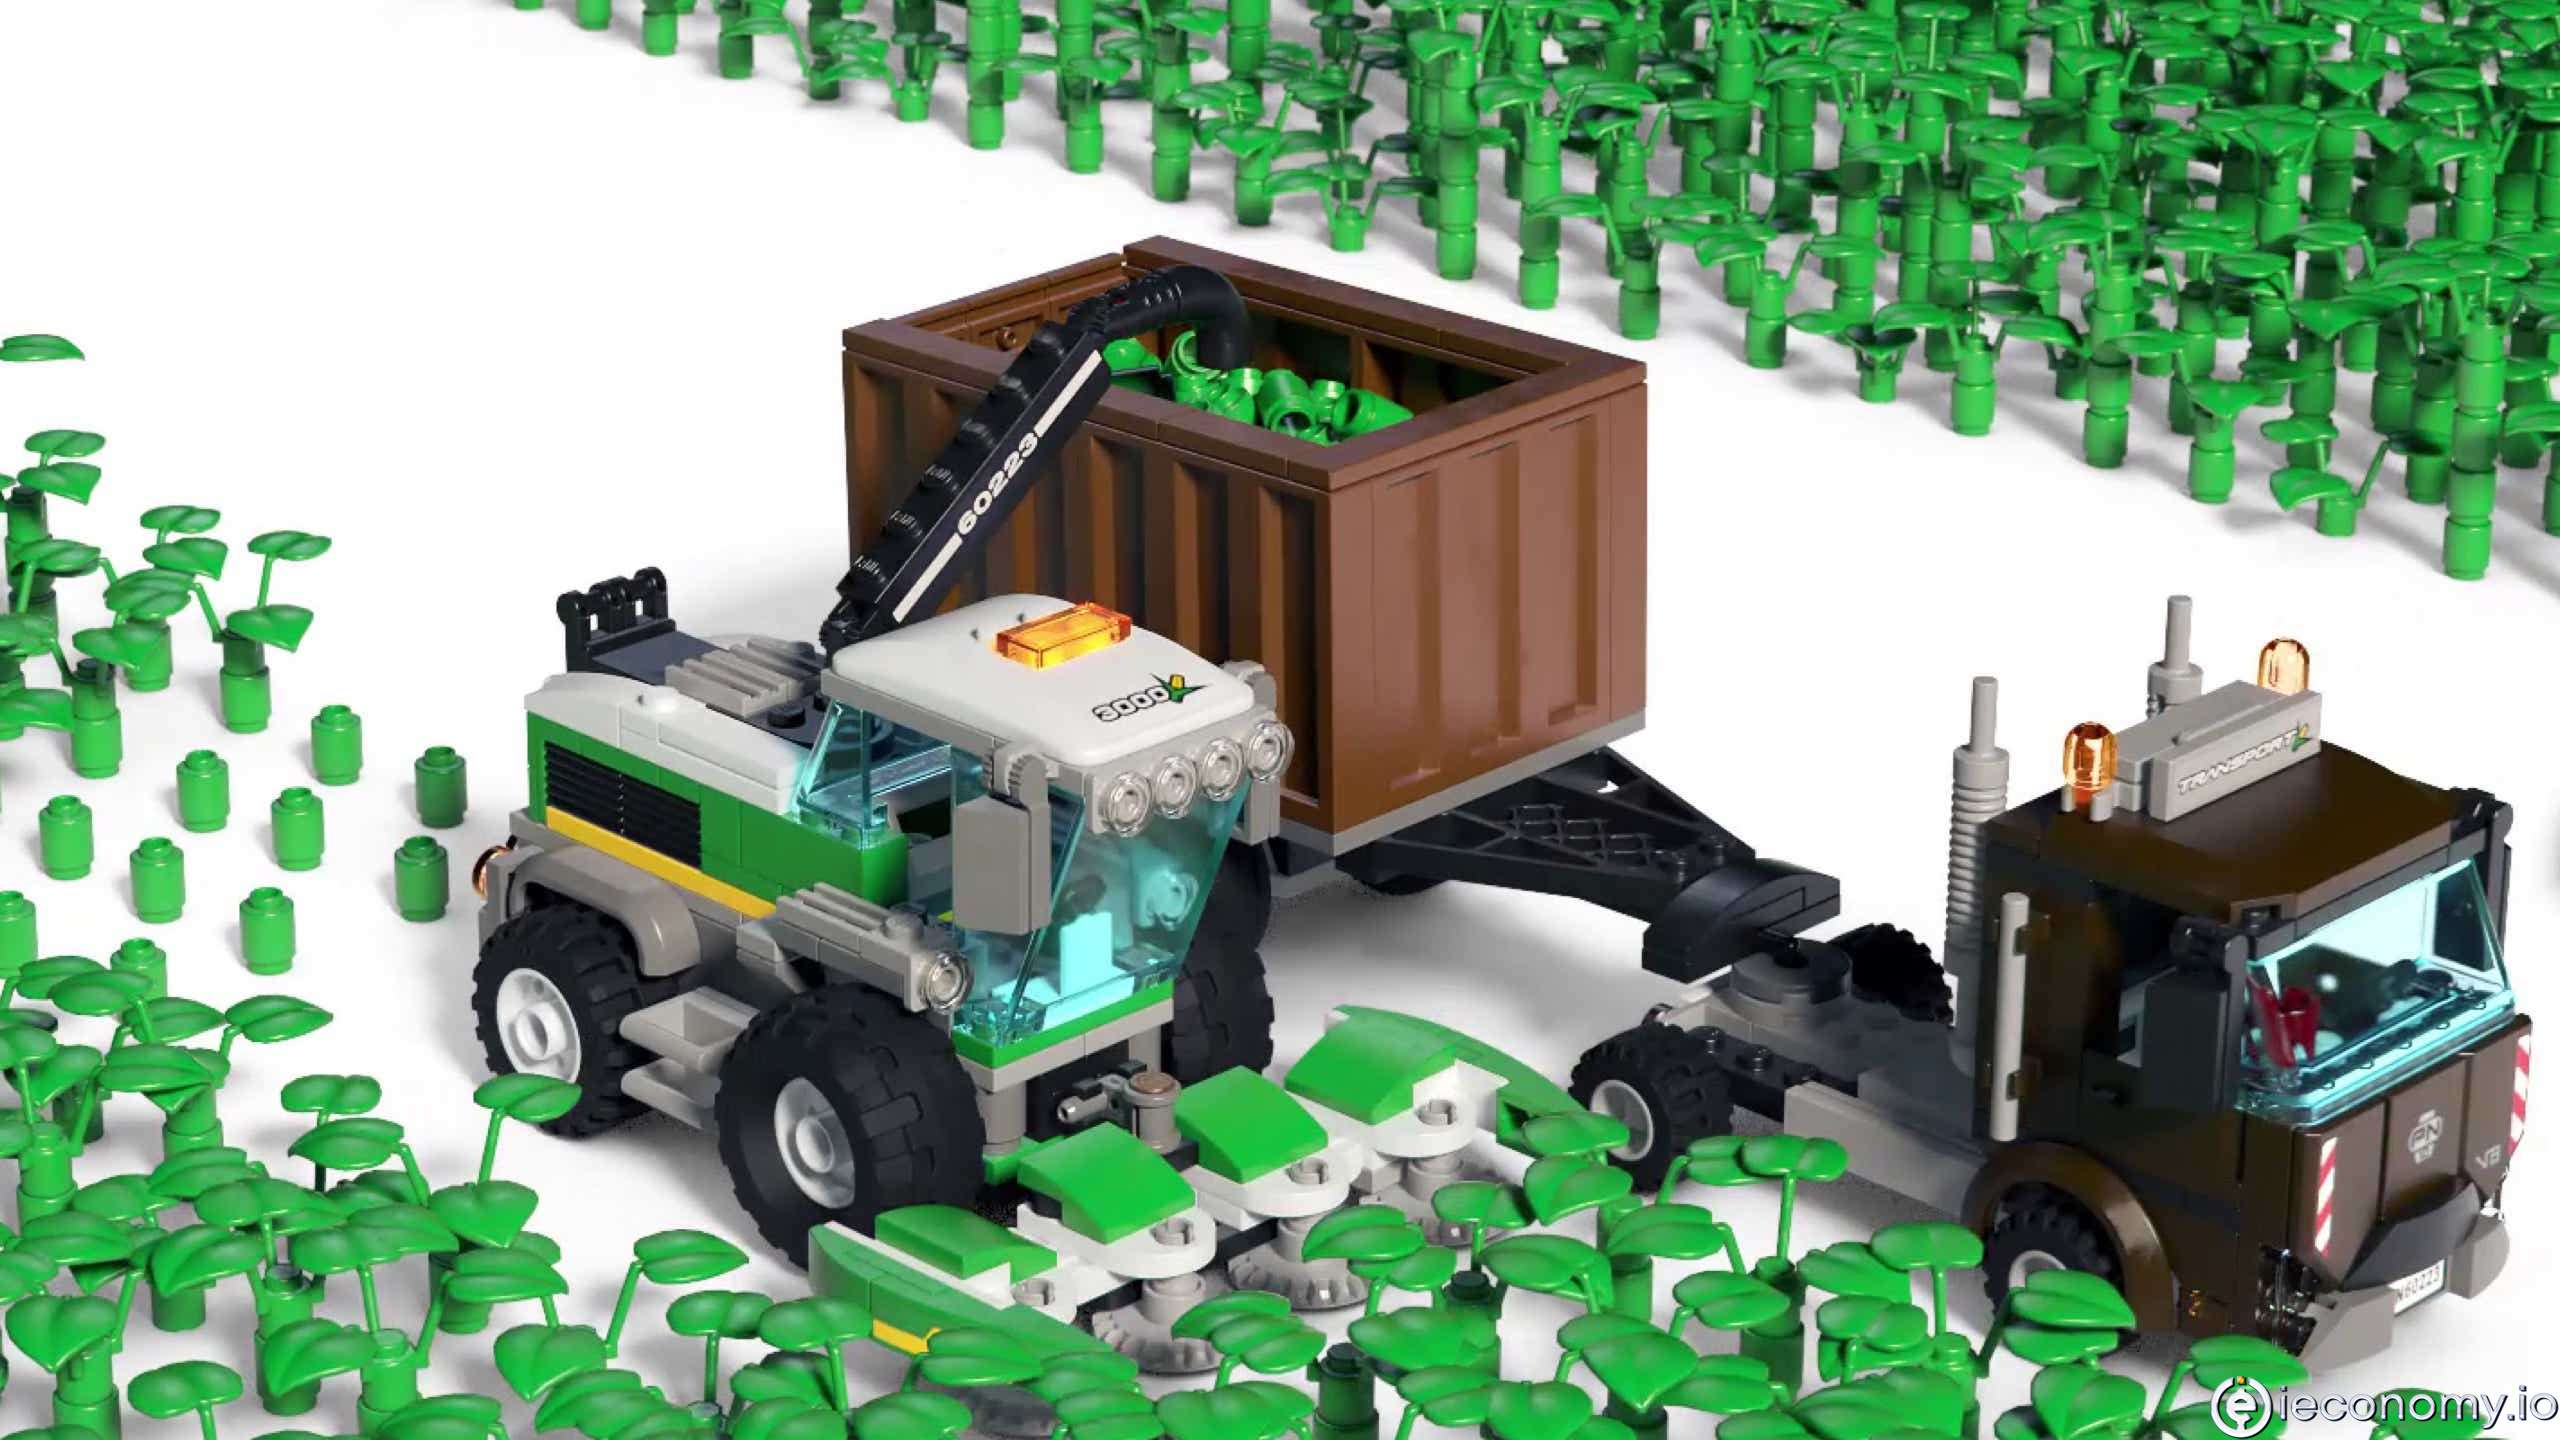 Lego wants to produce the bricks from renewable materials